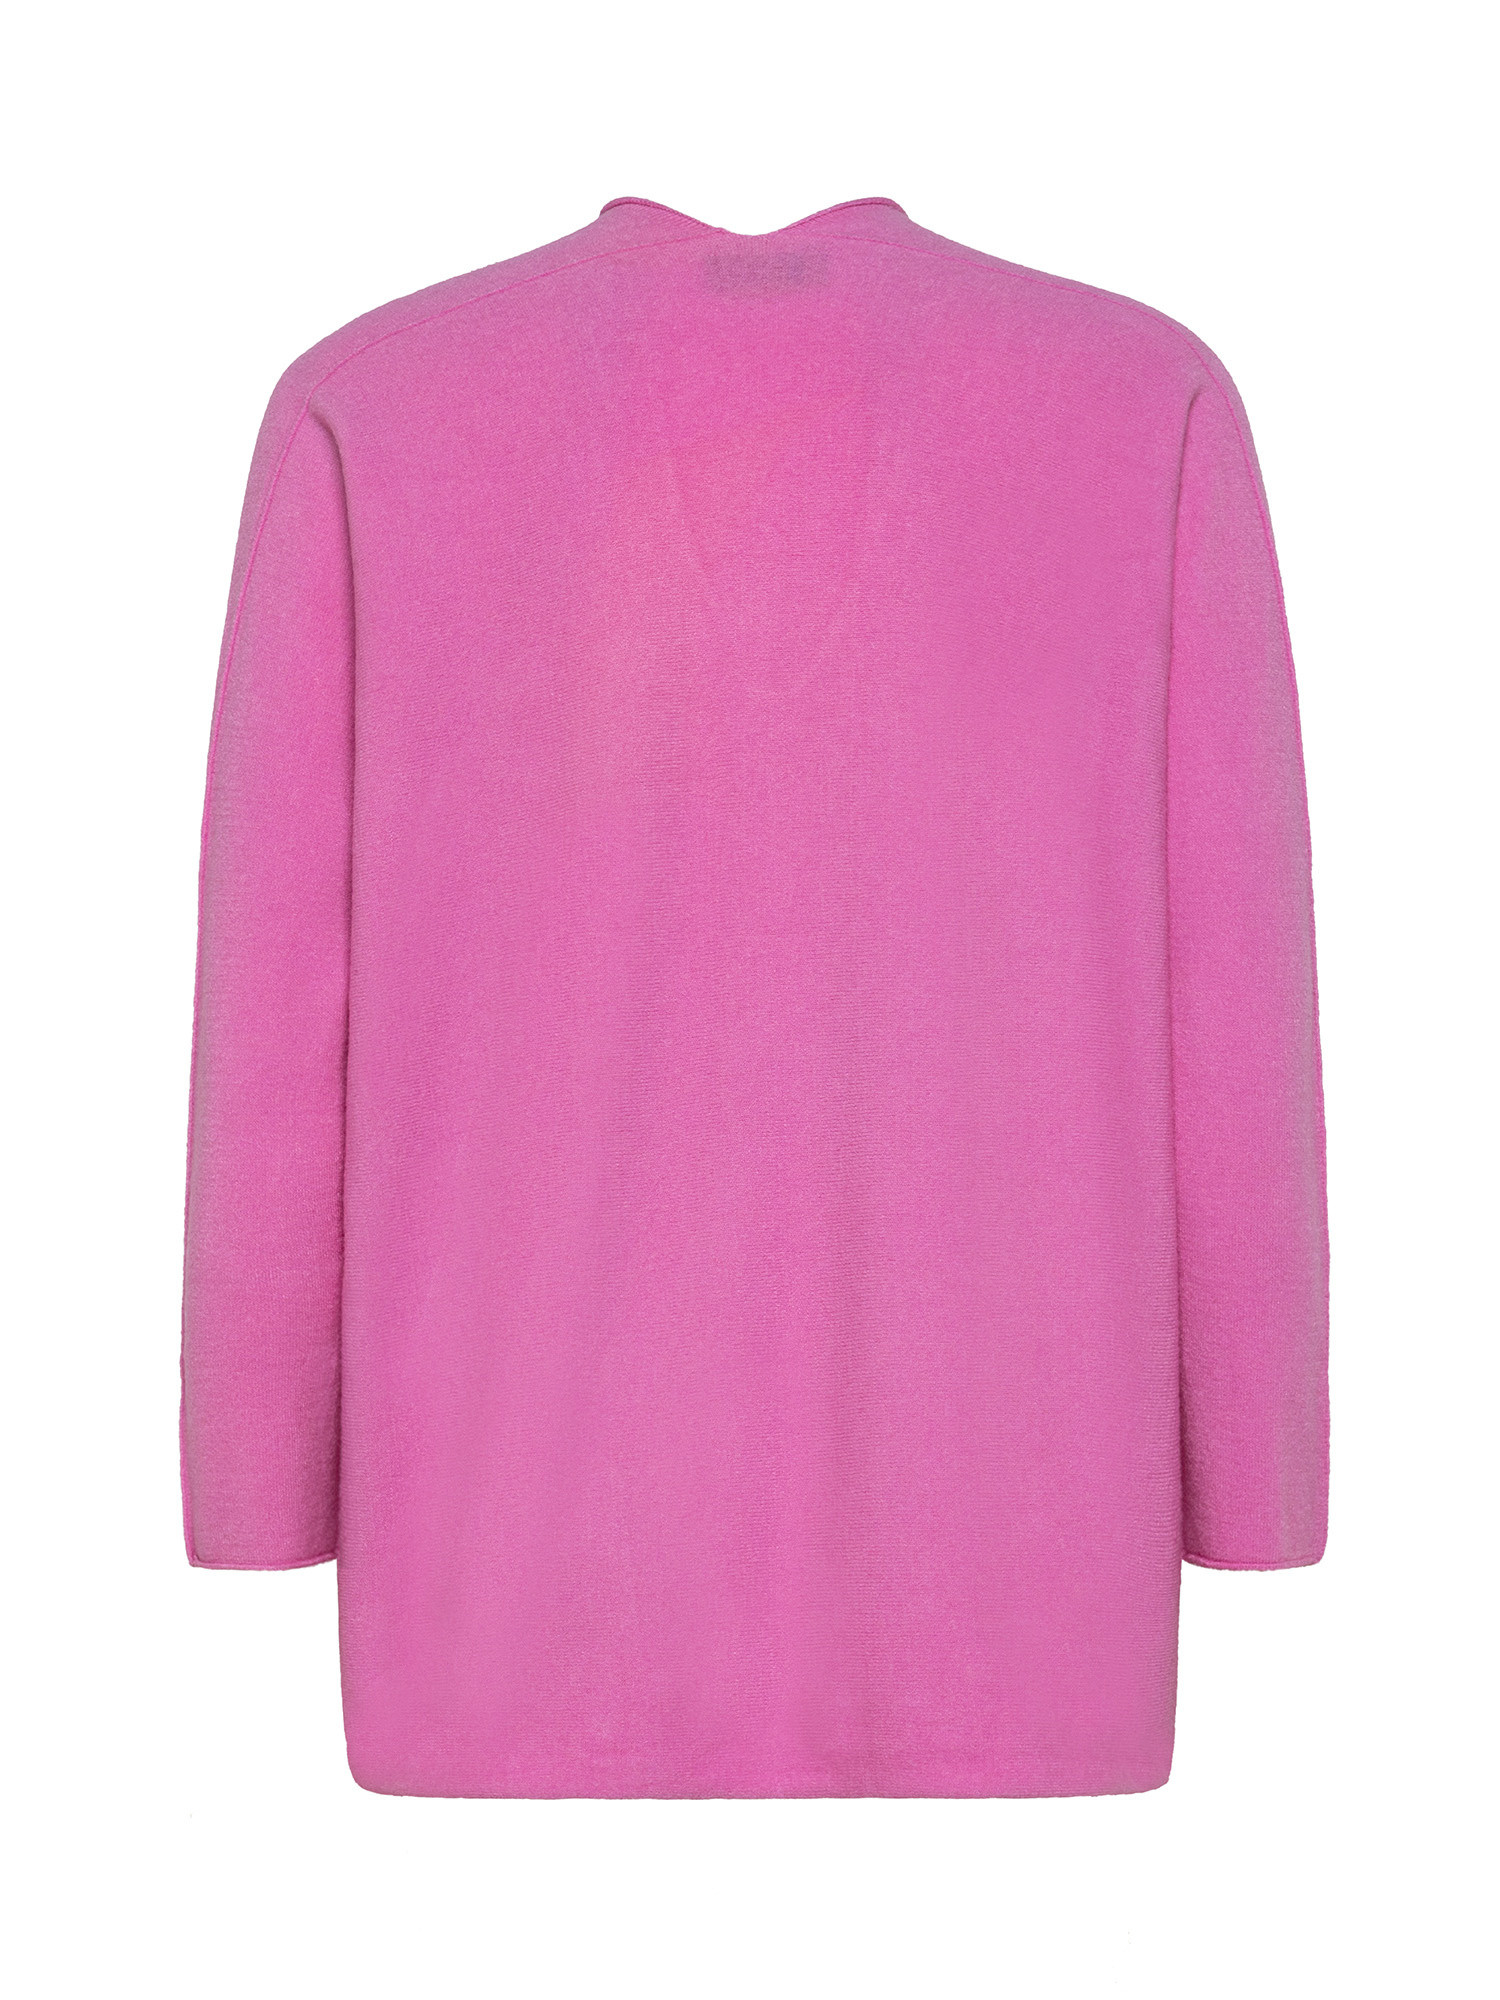 K Collection - Pullover, Pink Fuchsia, large image number 1